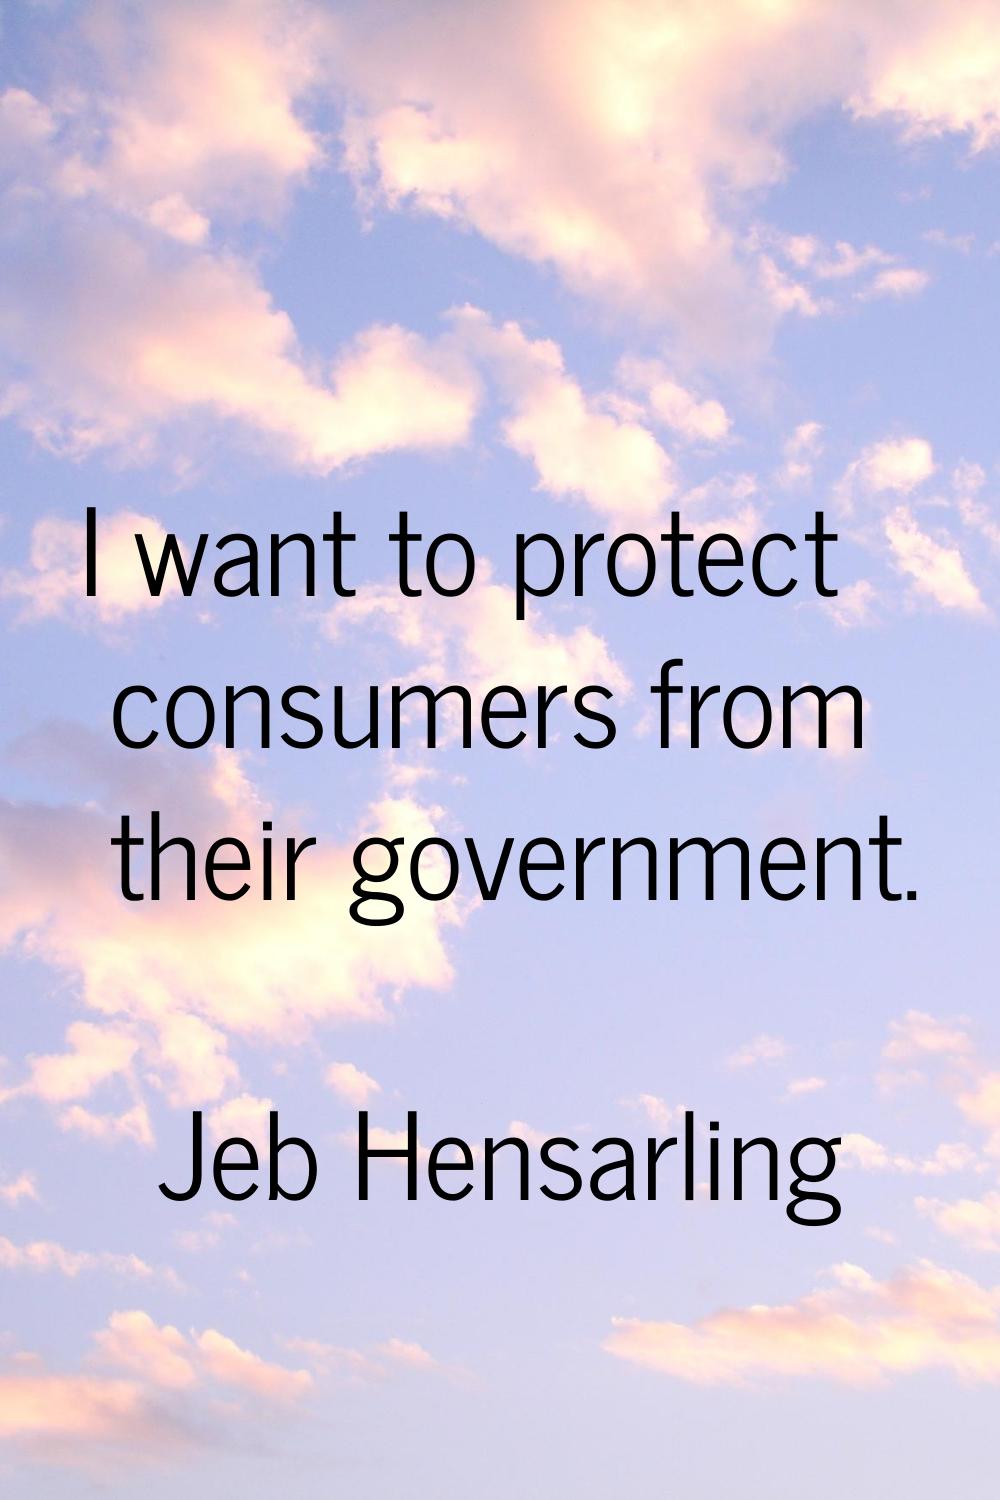 I want to protect consumers from their government.